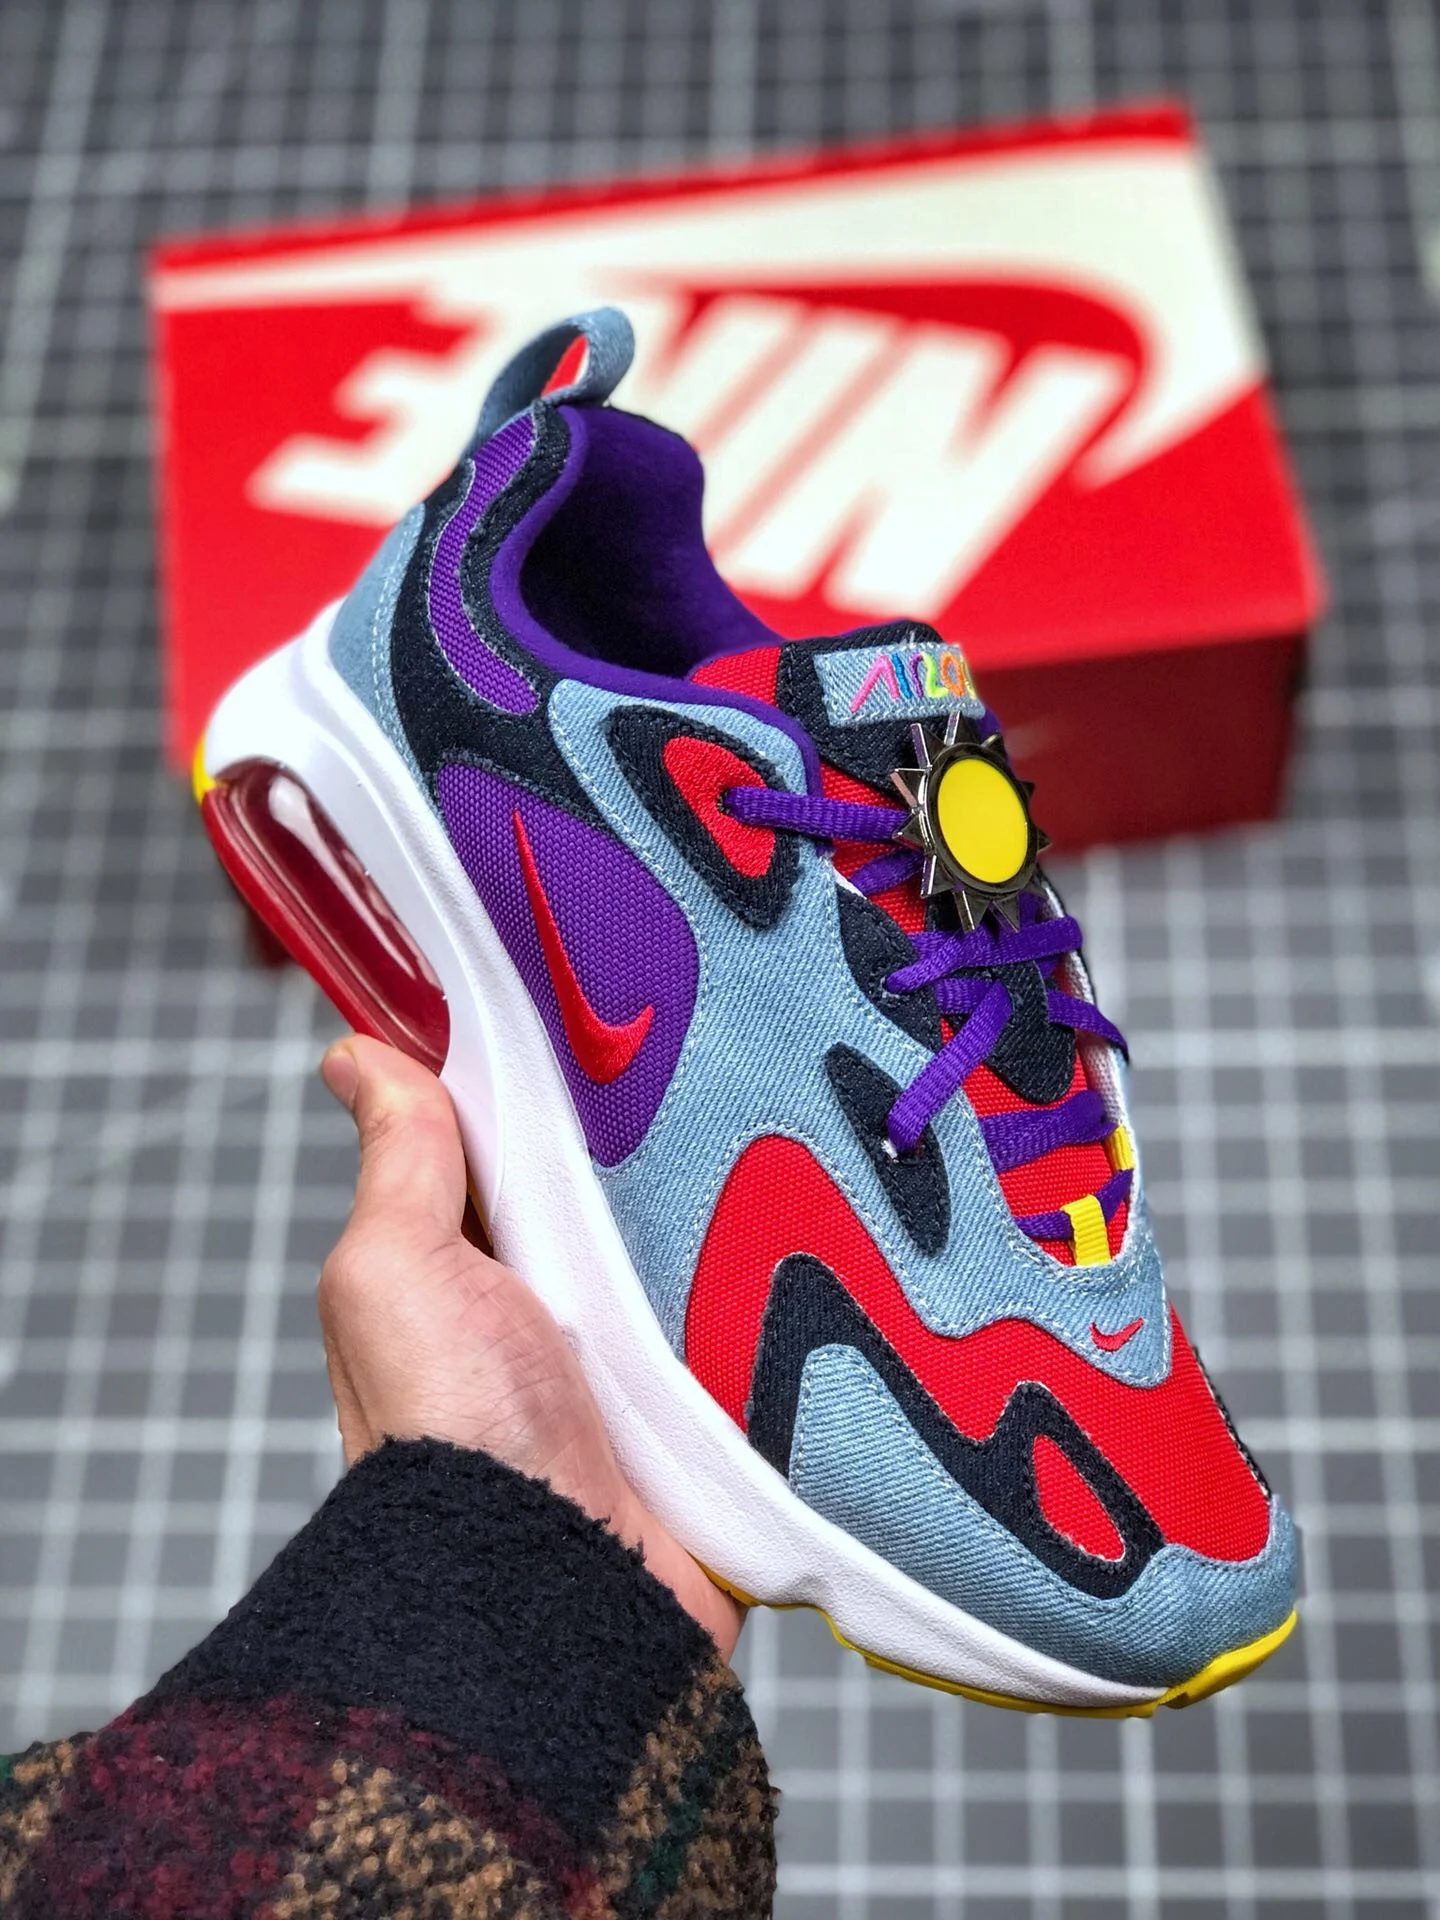 Nike Air Max 200 Voltage Purple University Red For Sale